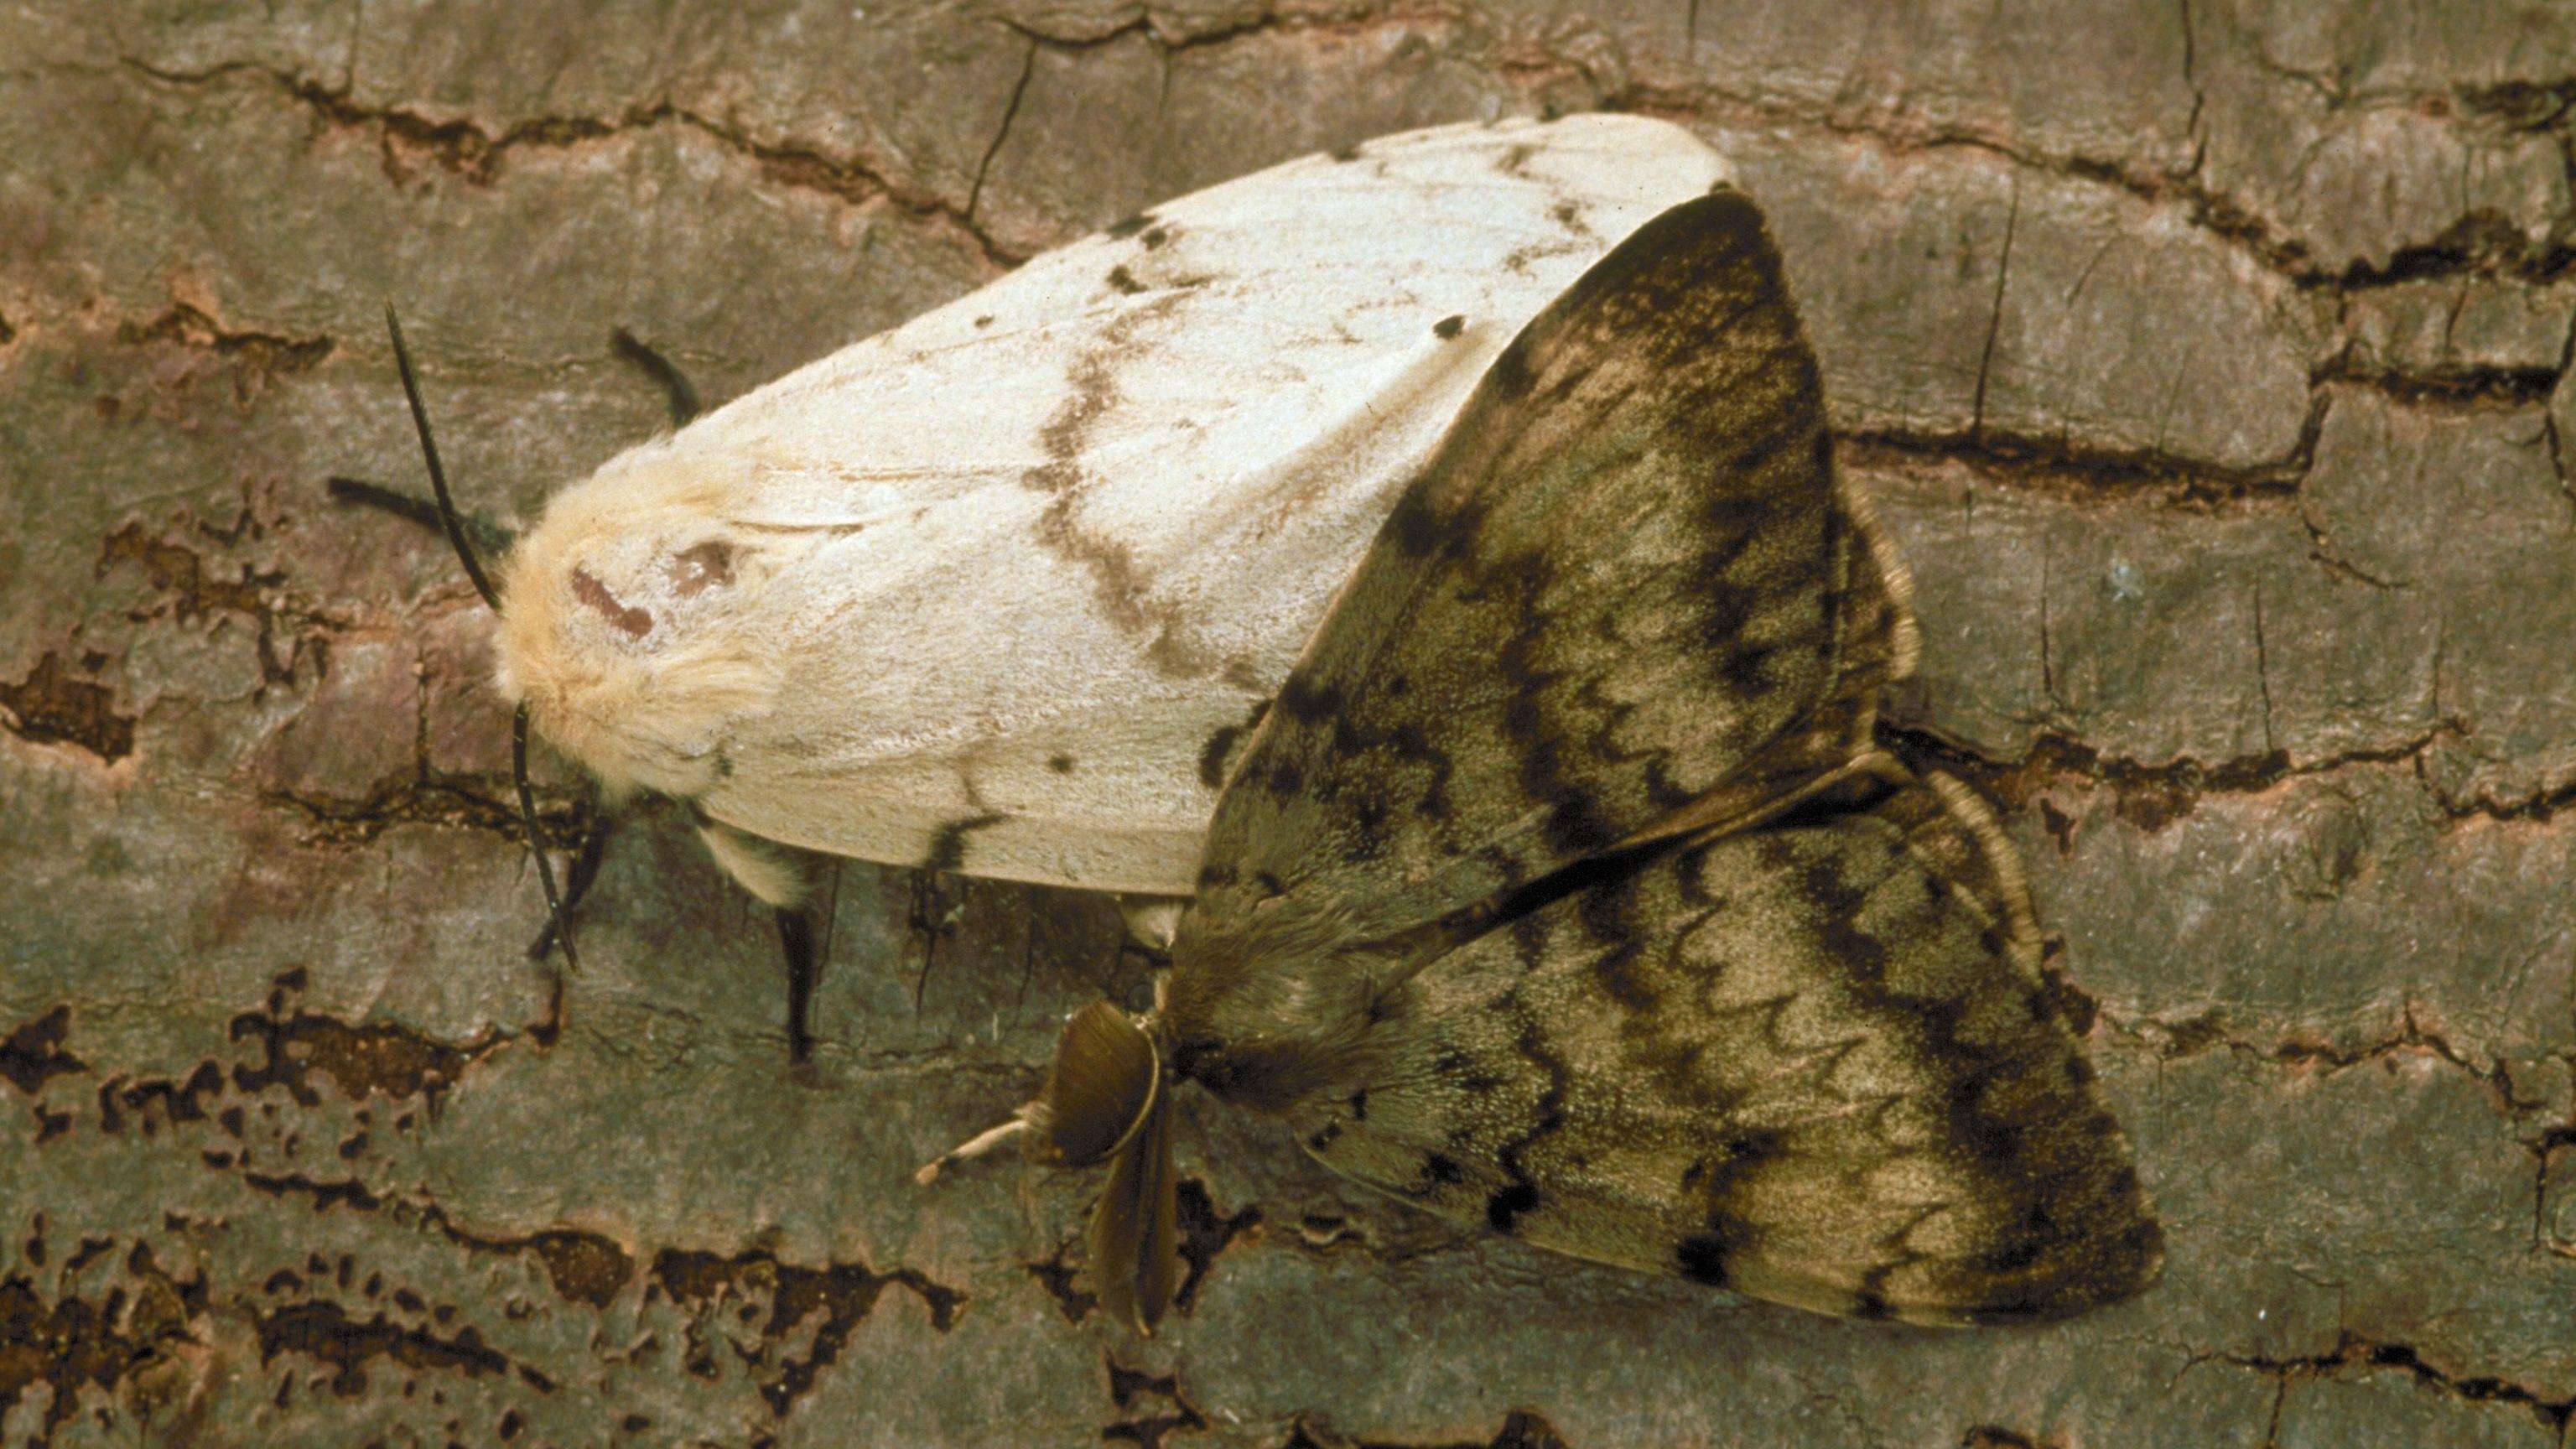 White female moth with light brown lines on its wings next to brown male moth with dark brown lines on its wings.